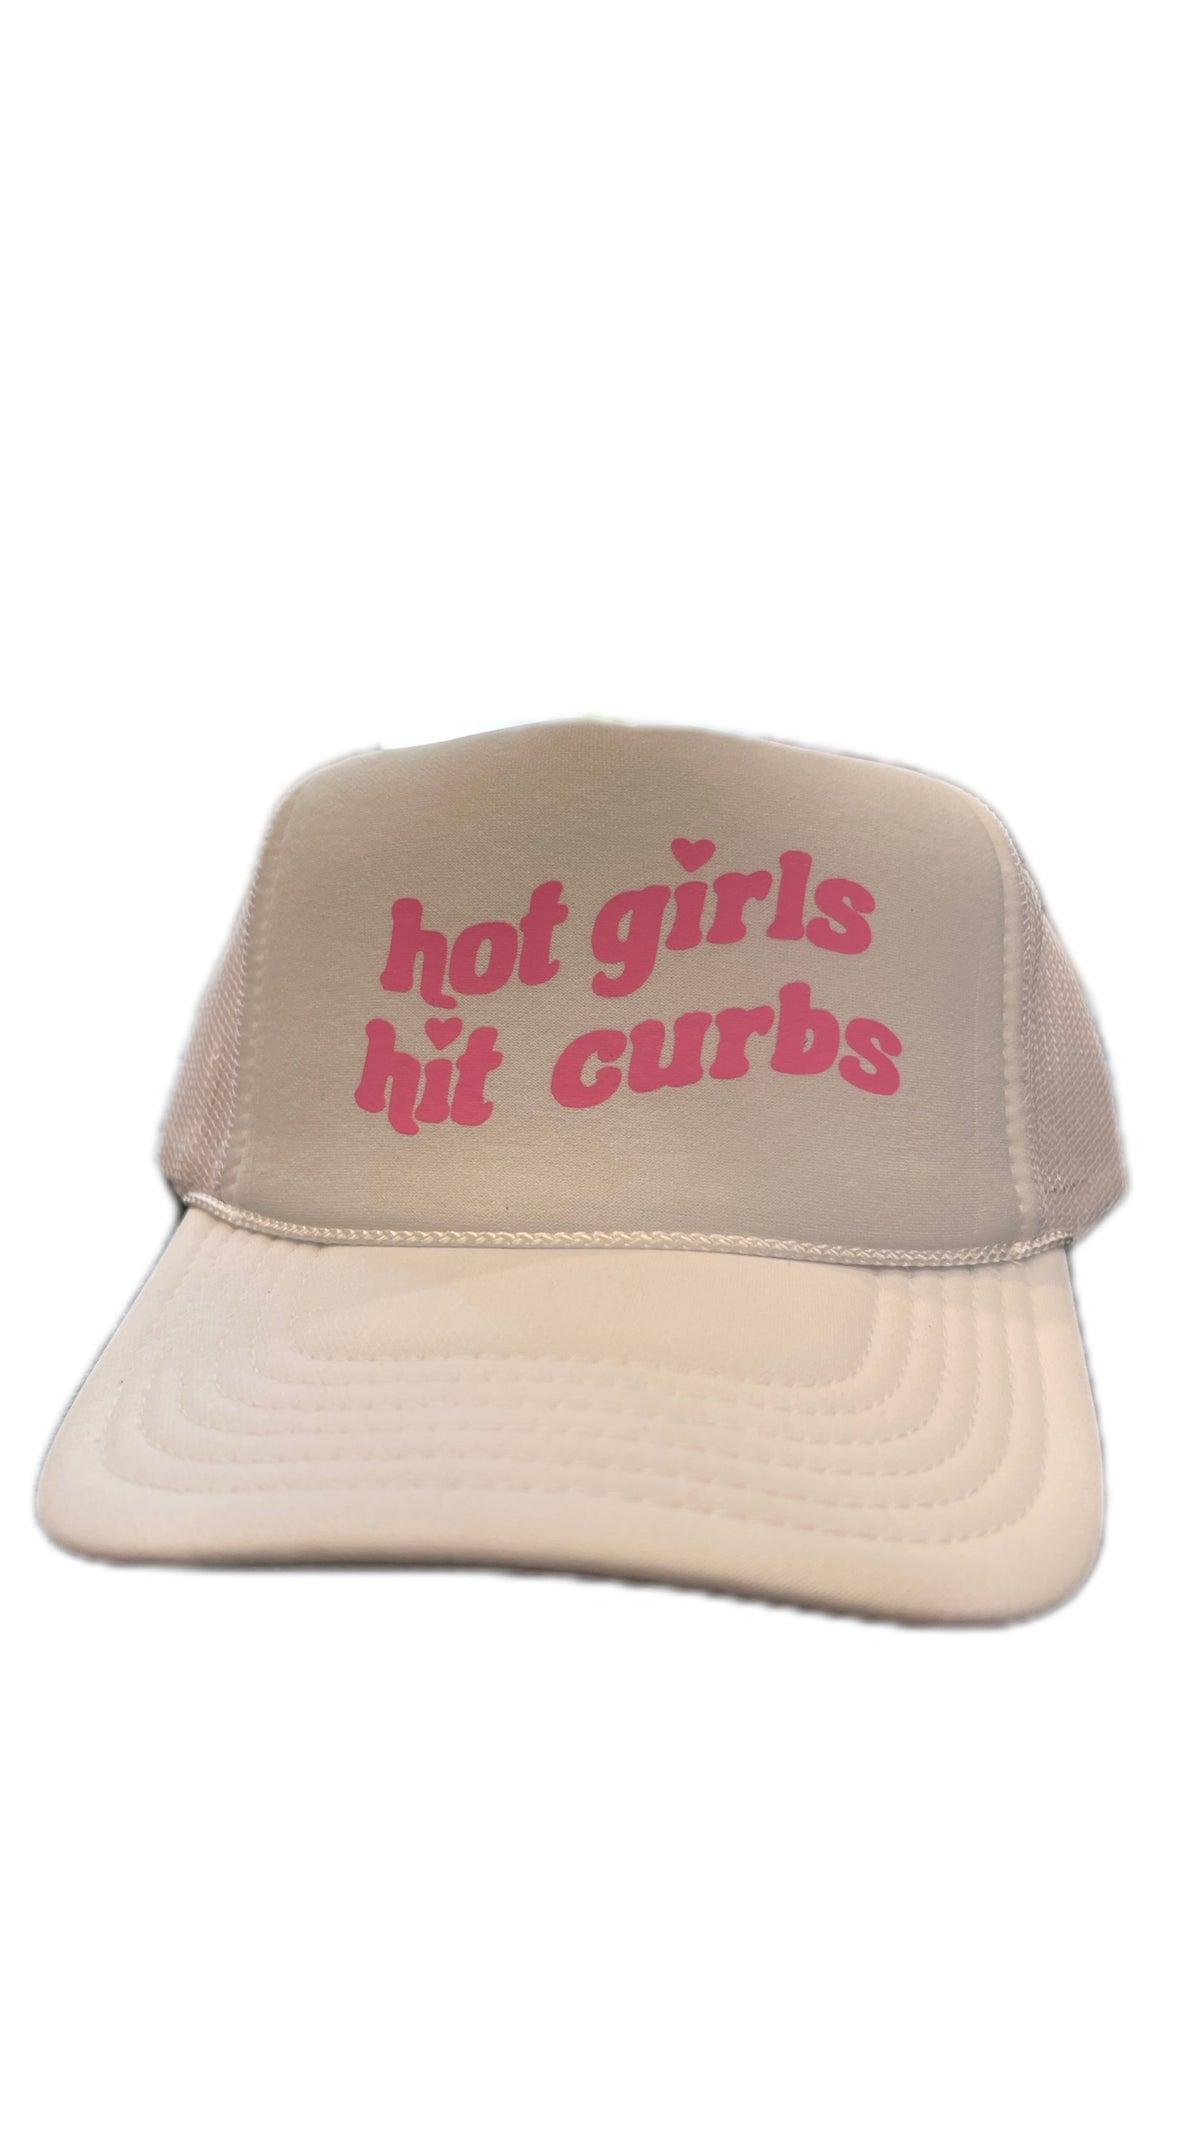 HOT GIRLS HIT CURBS TRUCKER HAT - PINK ON WHITE